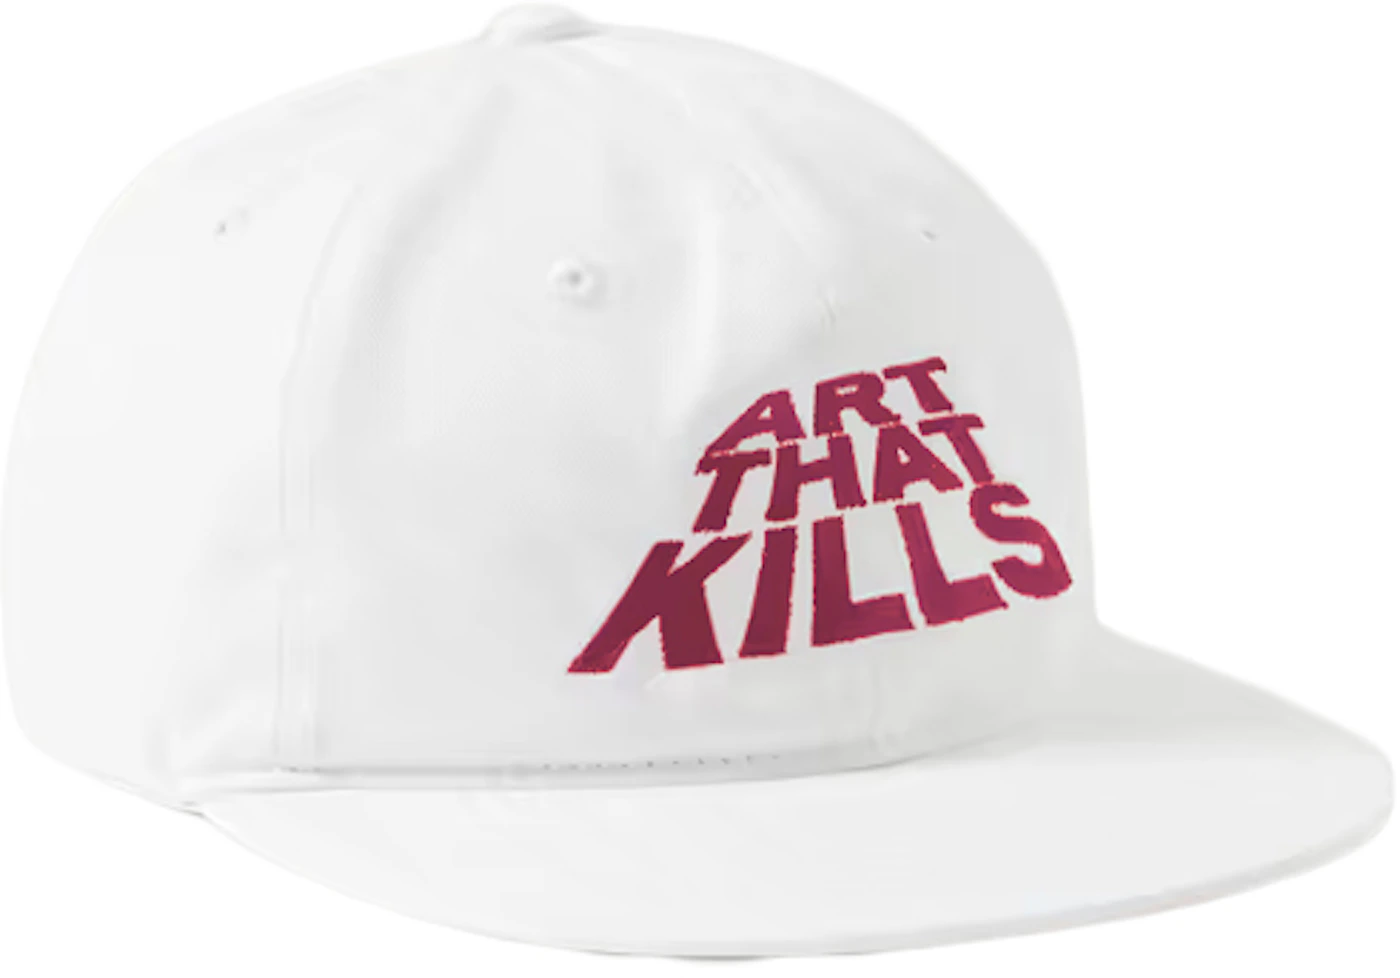 Gallery Dept. ATK Embroidered Cotton-Twill Baseball Cap White Men's - US